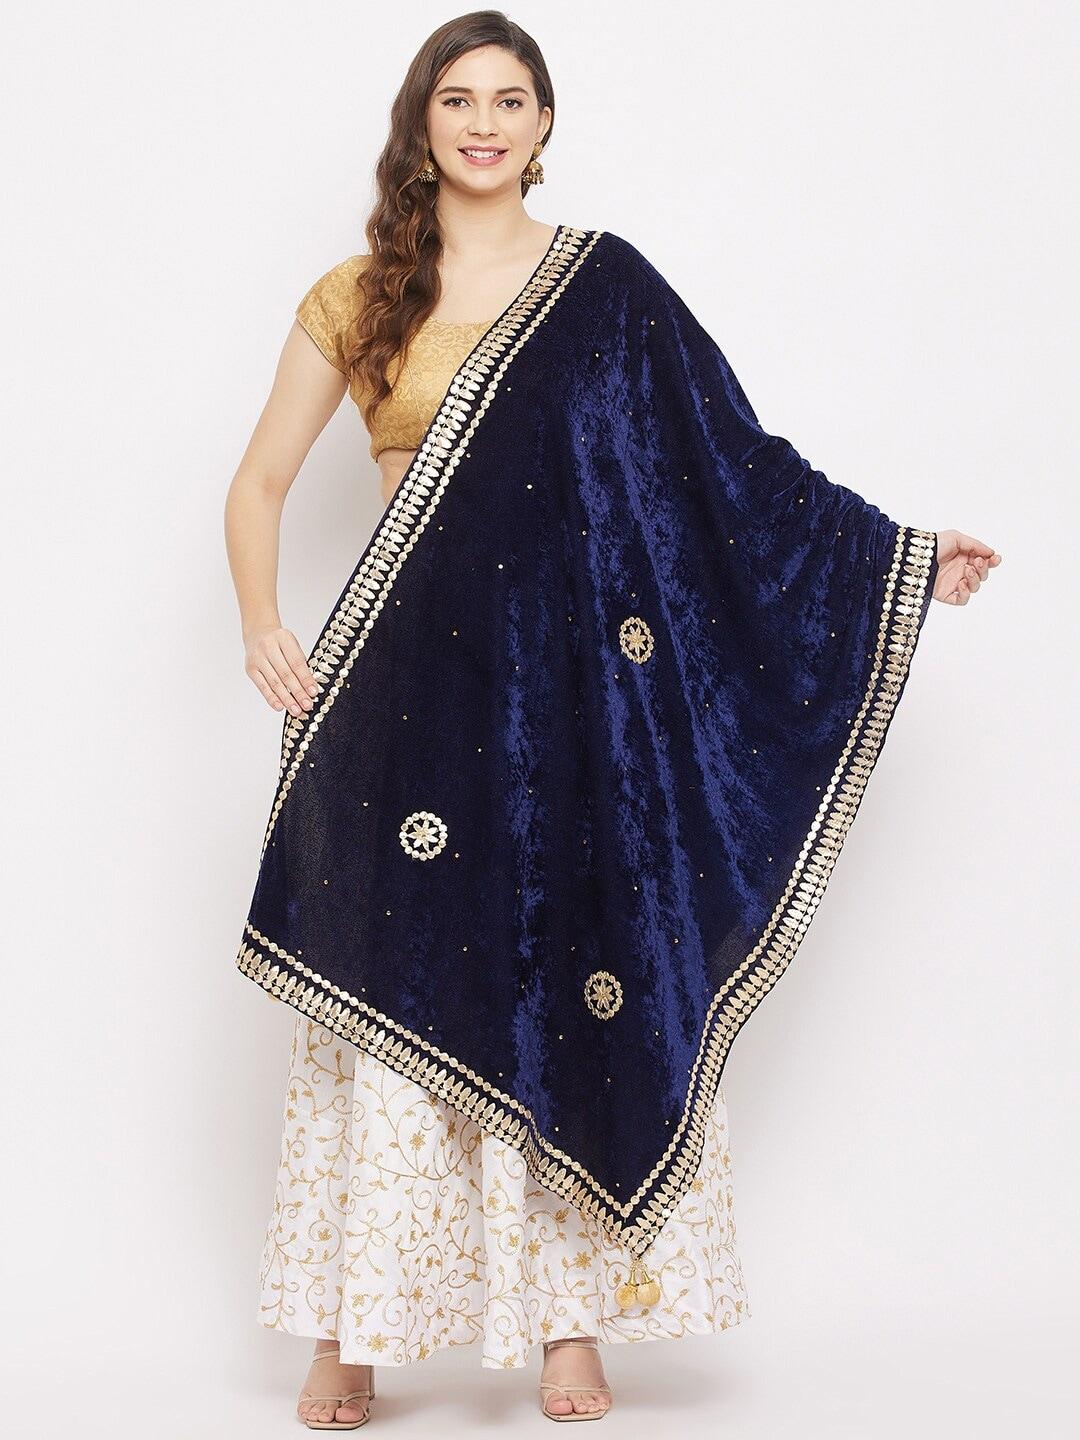 clora-creation-navy-blue-&-gold-toned-embroidered-velvet-dupatta-with-beads-and-stones